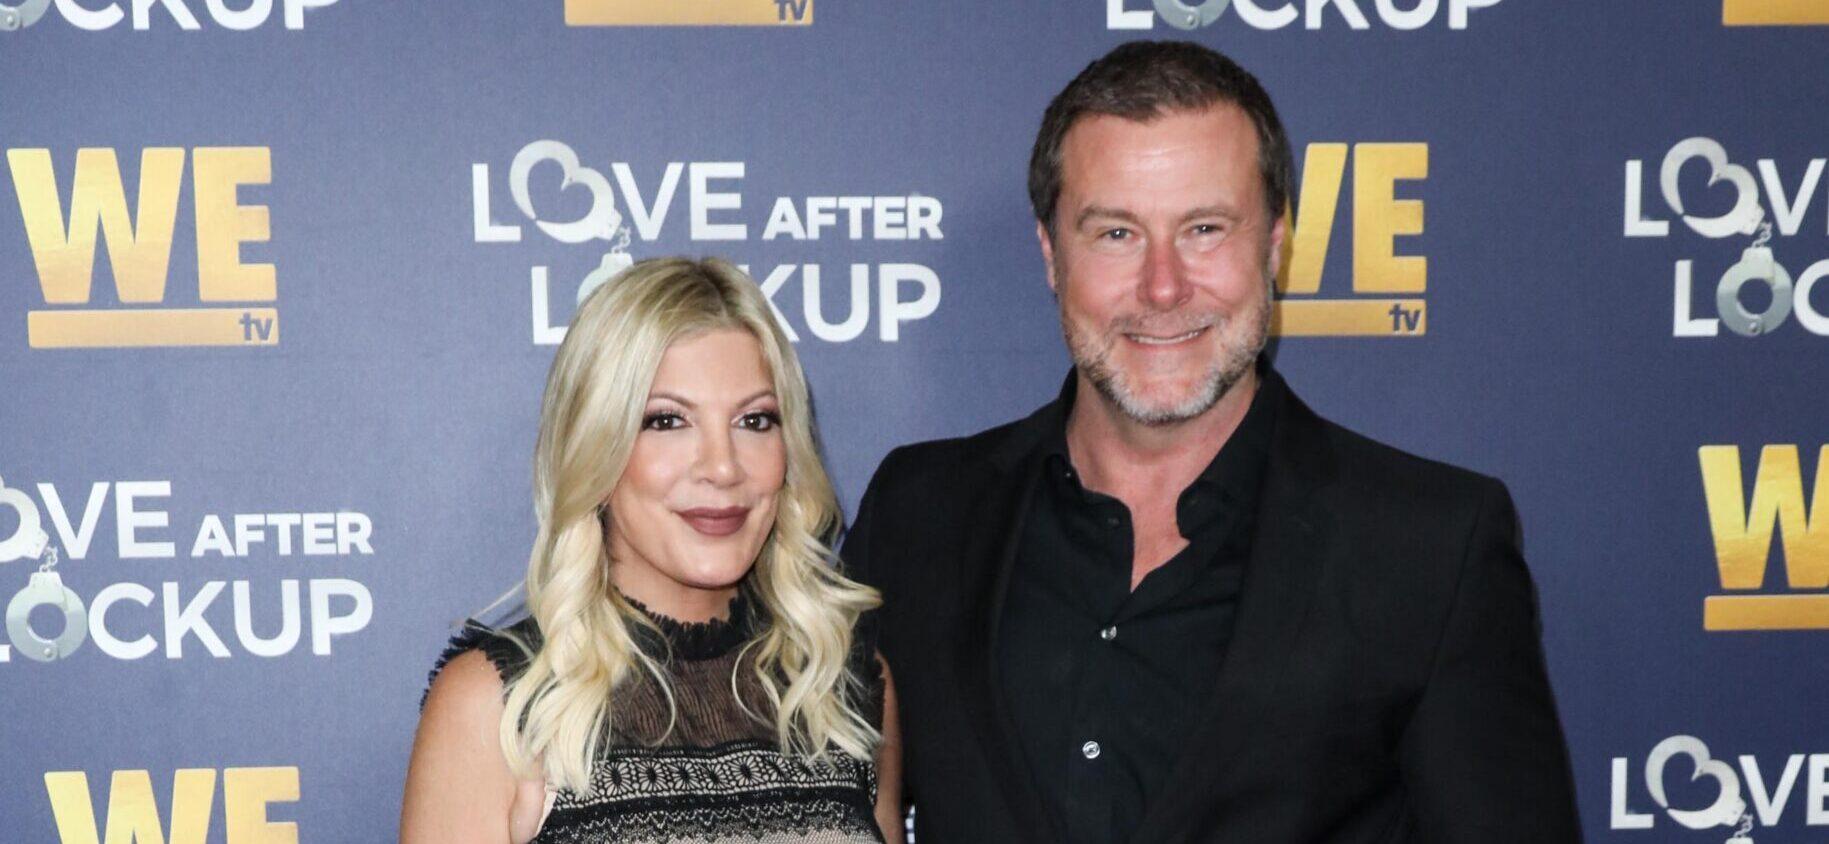 Tori Spelling Wears Another Graphic ‘WTF’ Shirt While Seen With Kids At Friend’s Home